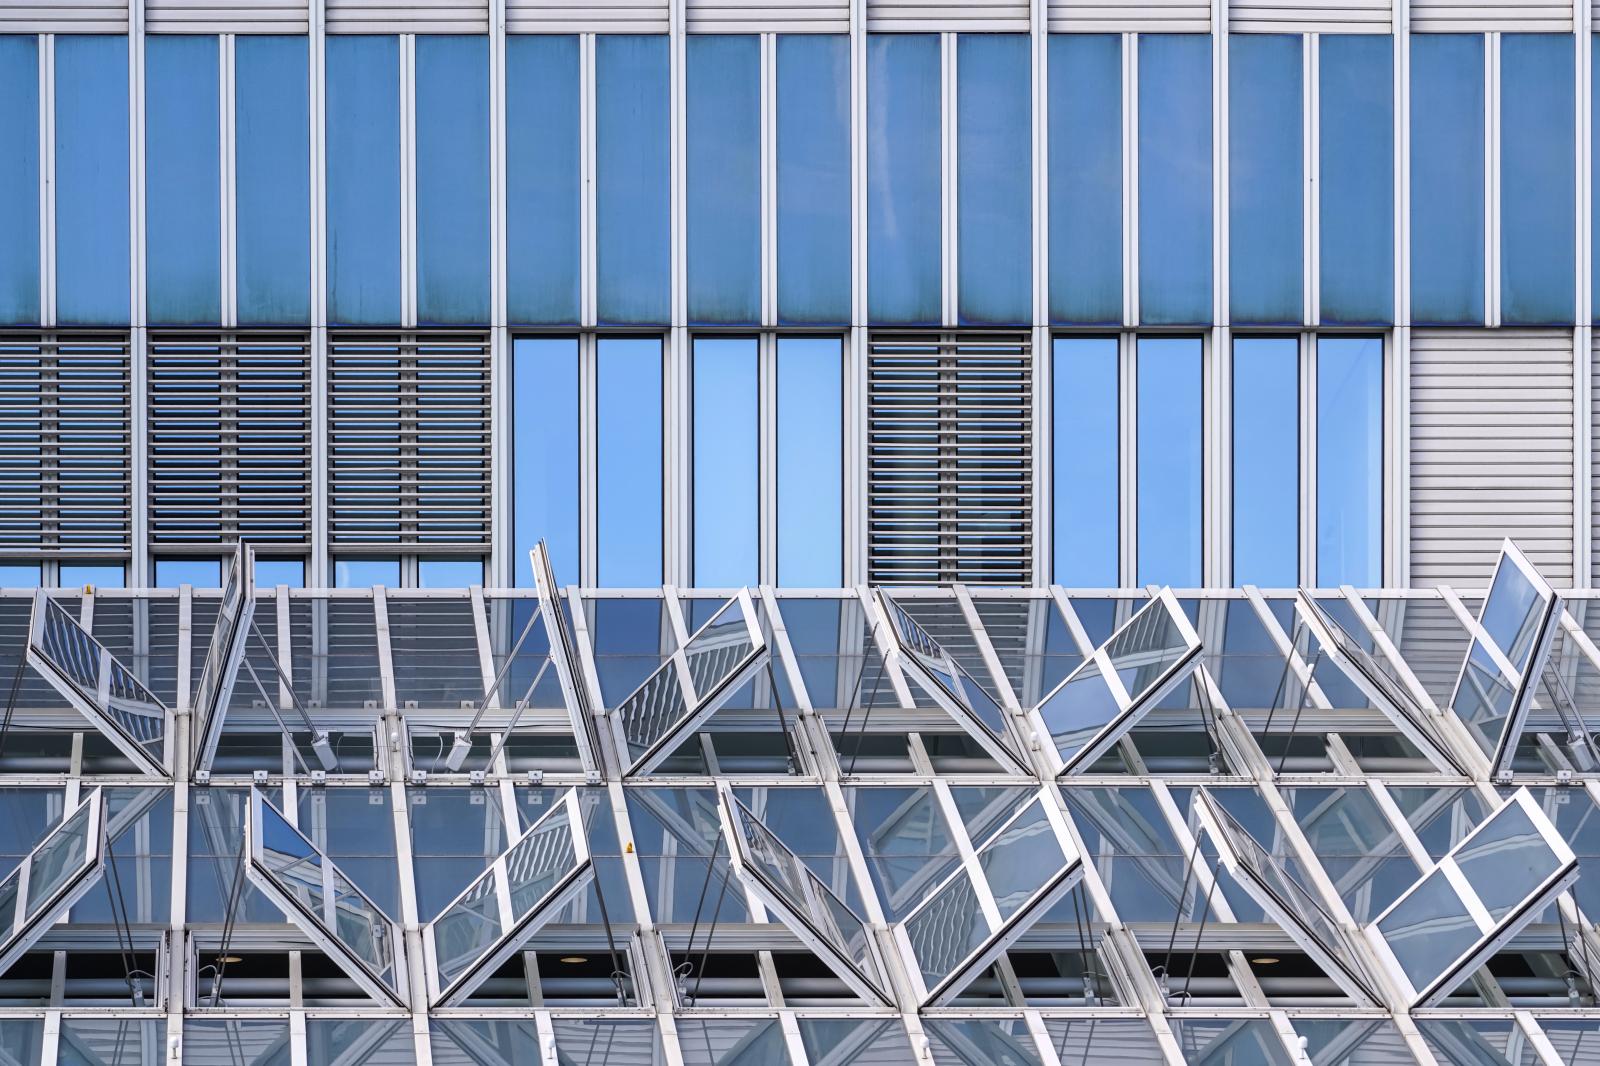 Geometric Progressions: Facade with Glass Canopy | Buy this image